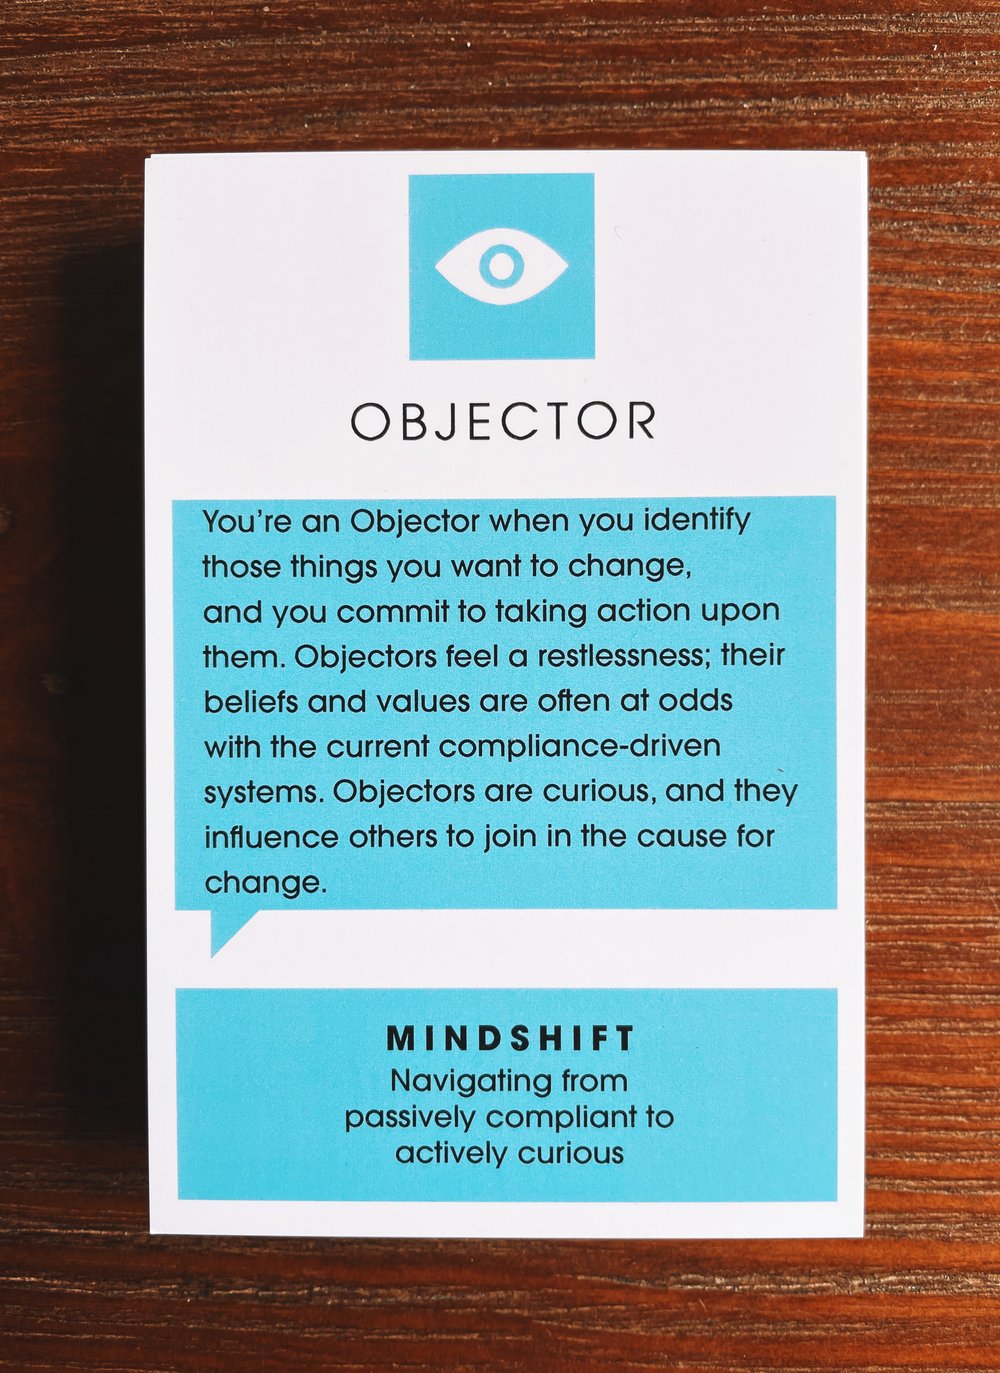 Mindshift Cards — The Human School